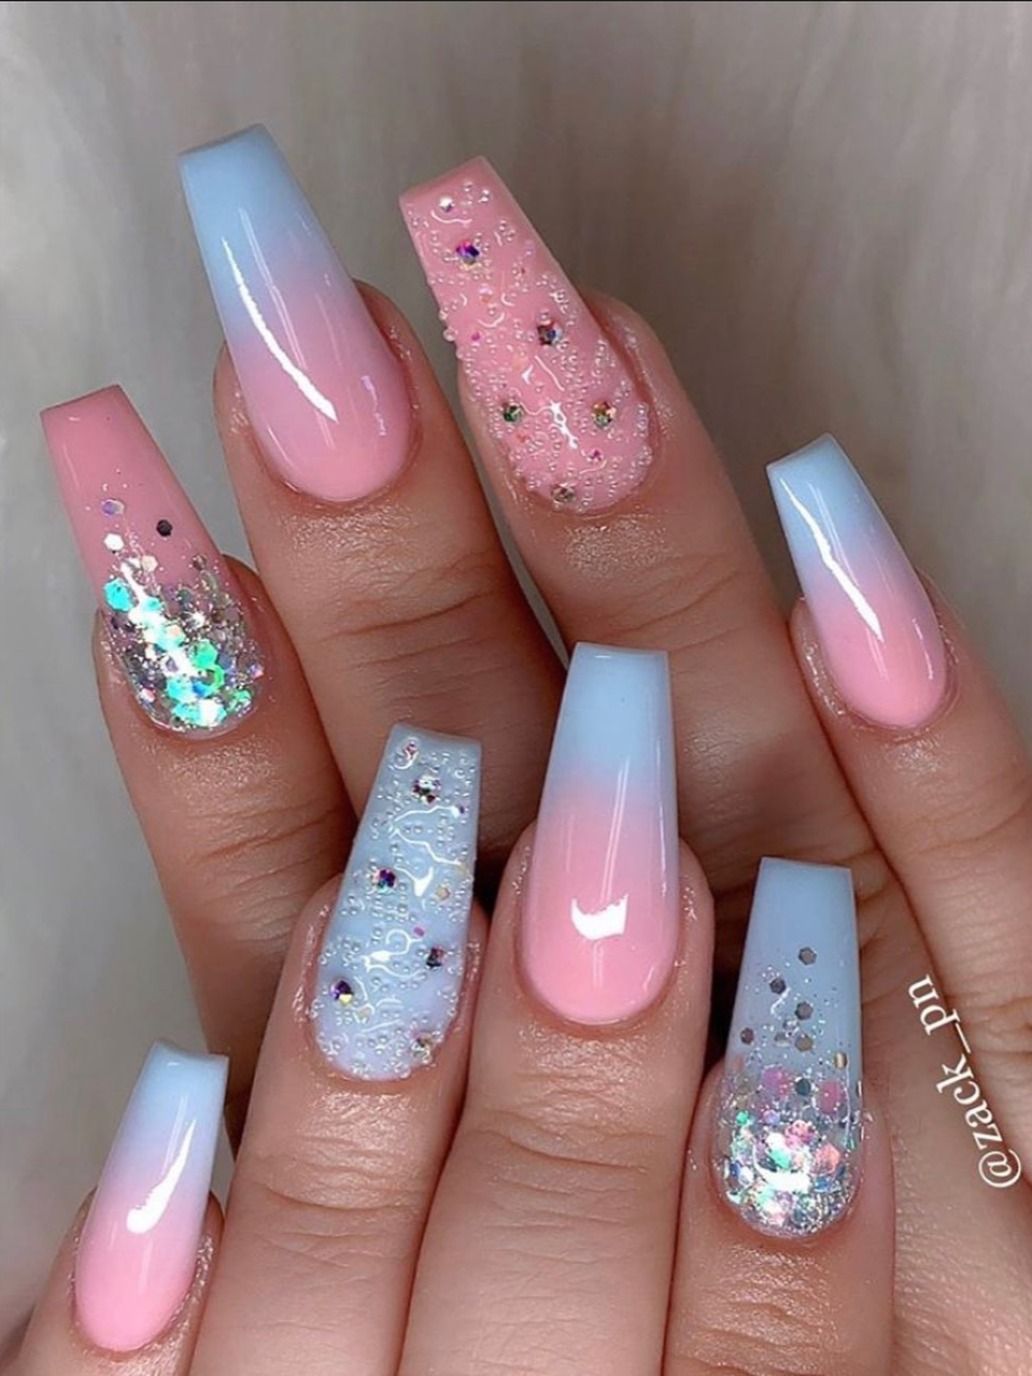 Cute Gradient Nails 2020 Consist Of Pink And Blue Ombre Nails With Two Accent Nails With Glitter And Rhinestone In 2020 Coffin Nails Designs Nail Designs Stylish Nails